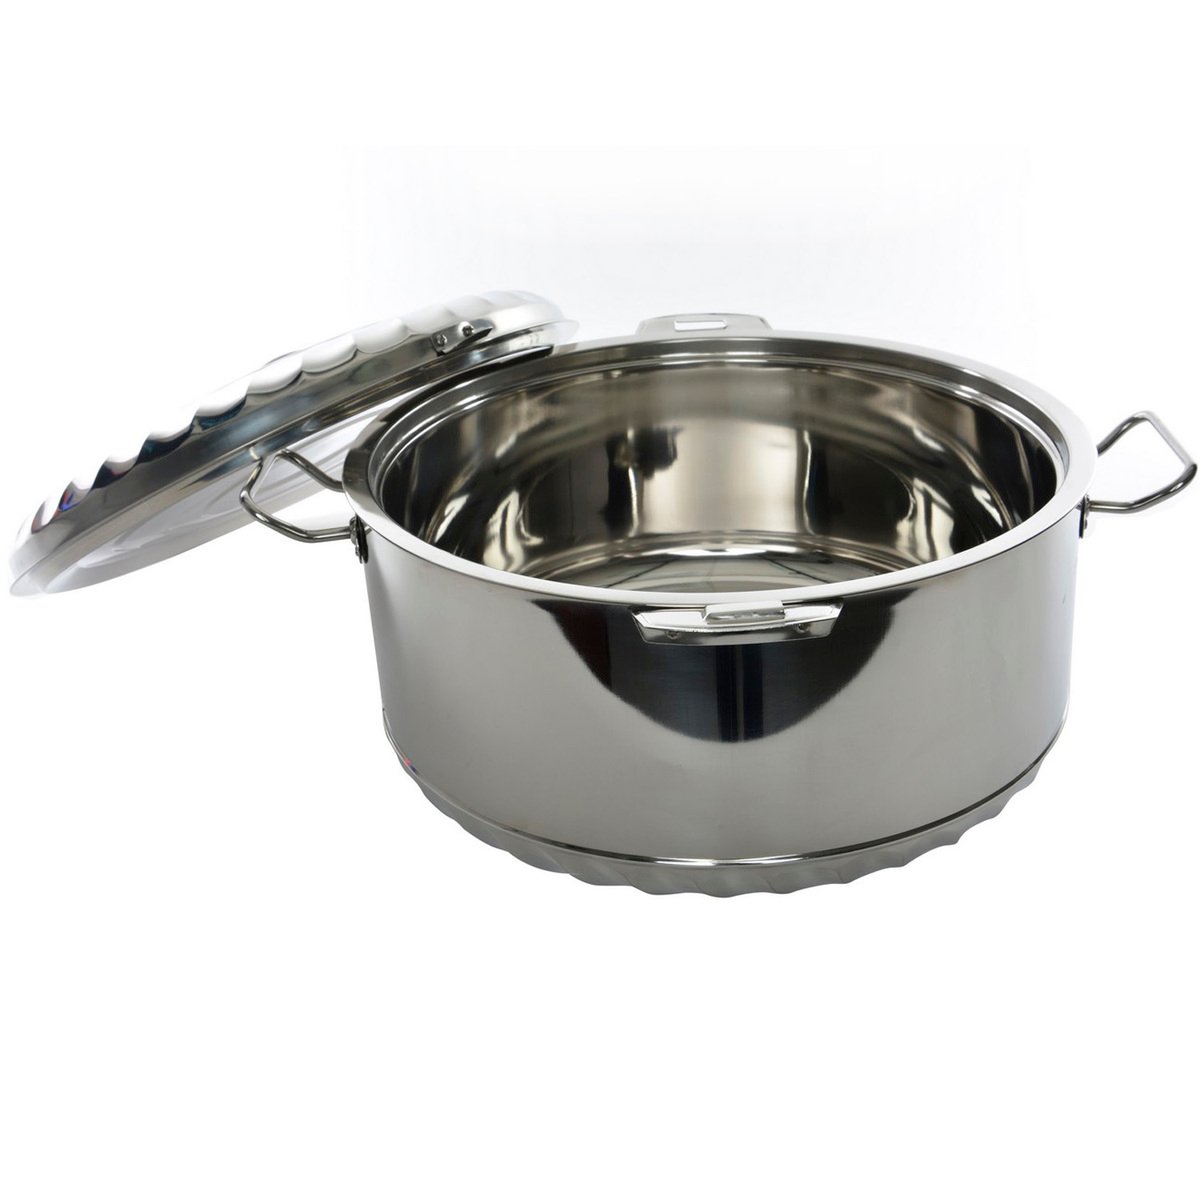 Chefline Stainless Steel Hot Pot Solitaire 1000ml